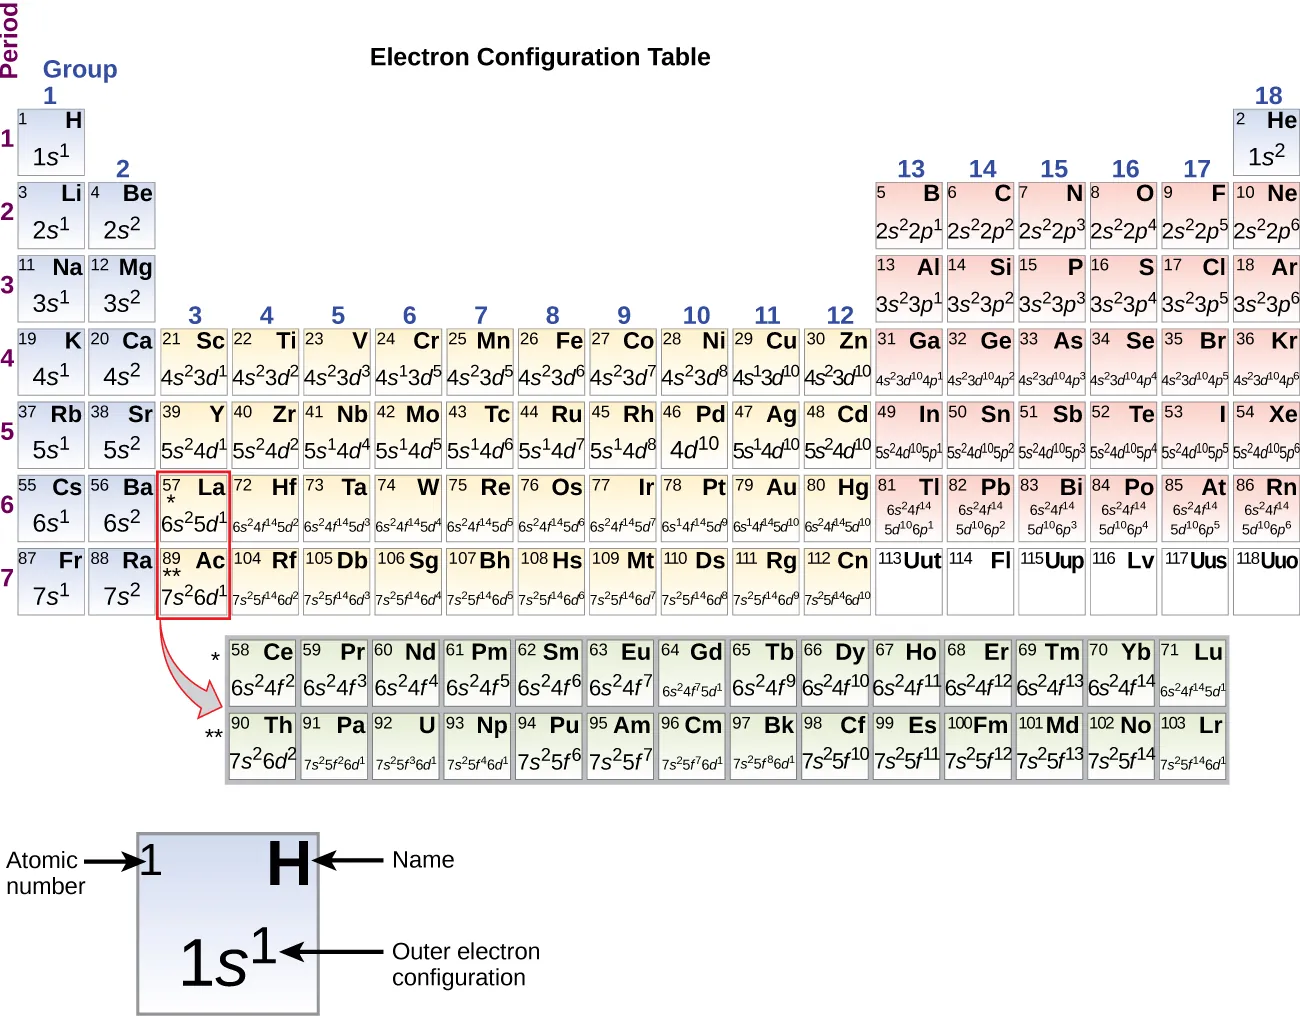 A periodic table, entitled, “Electron Configuration Table” is shown. The table includes the outer electron configuration information, atomic numbers, and element symbols for all elements. A square for the element hydrogen is pulled out beneath the table to provide detail. The blue shaded square includes the atomic number in the upper left corner, which is 1, the element symbol, H in the upper right corner, and the outer electron configuration in the lower, central portion of the square. For H, this is 1 s superscript 1.